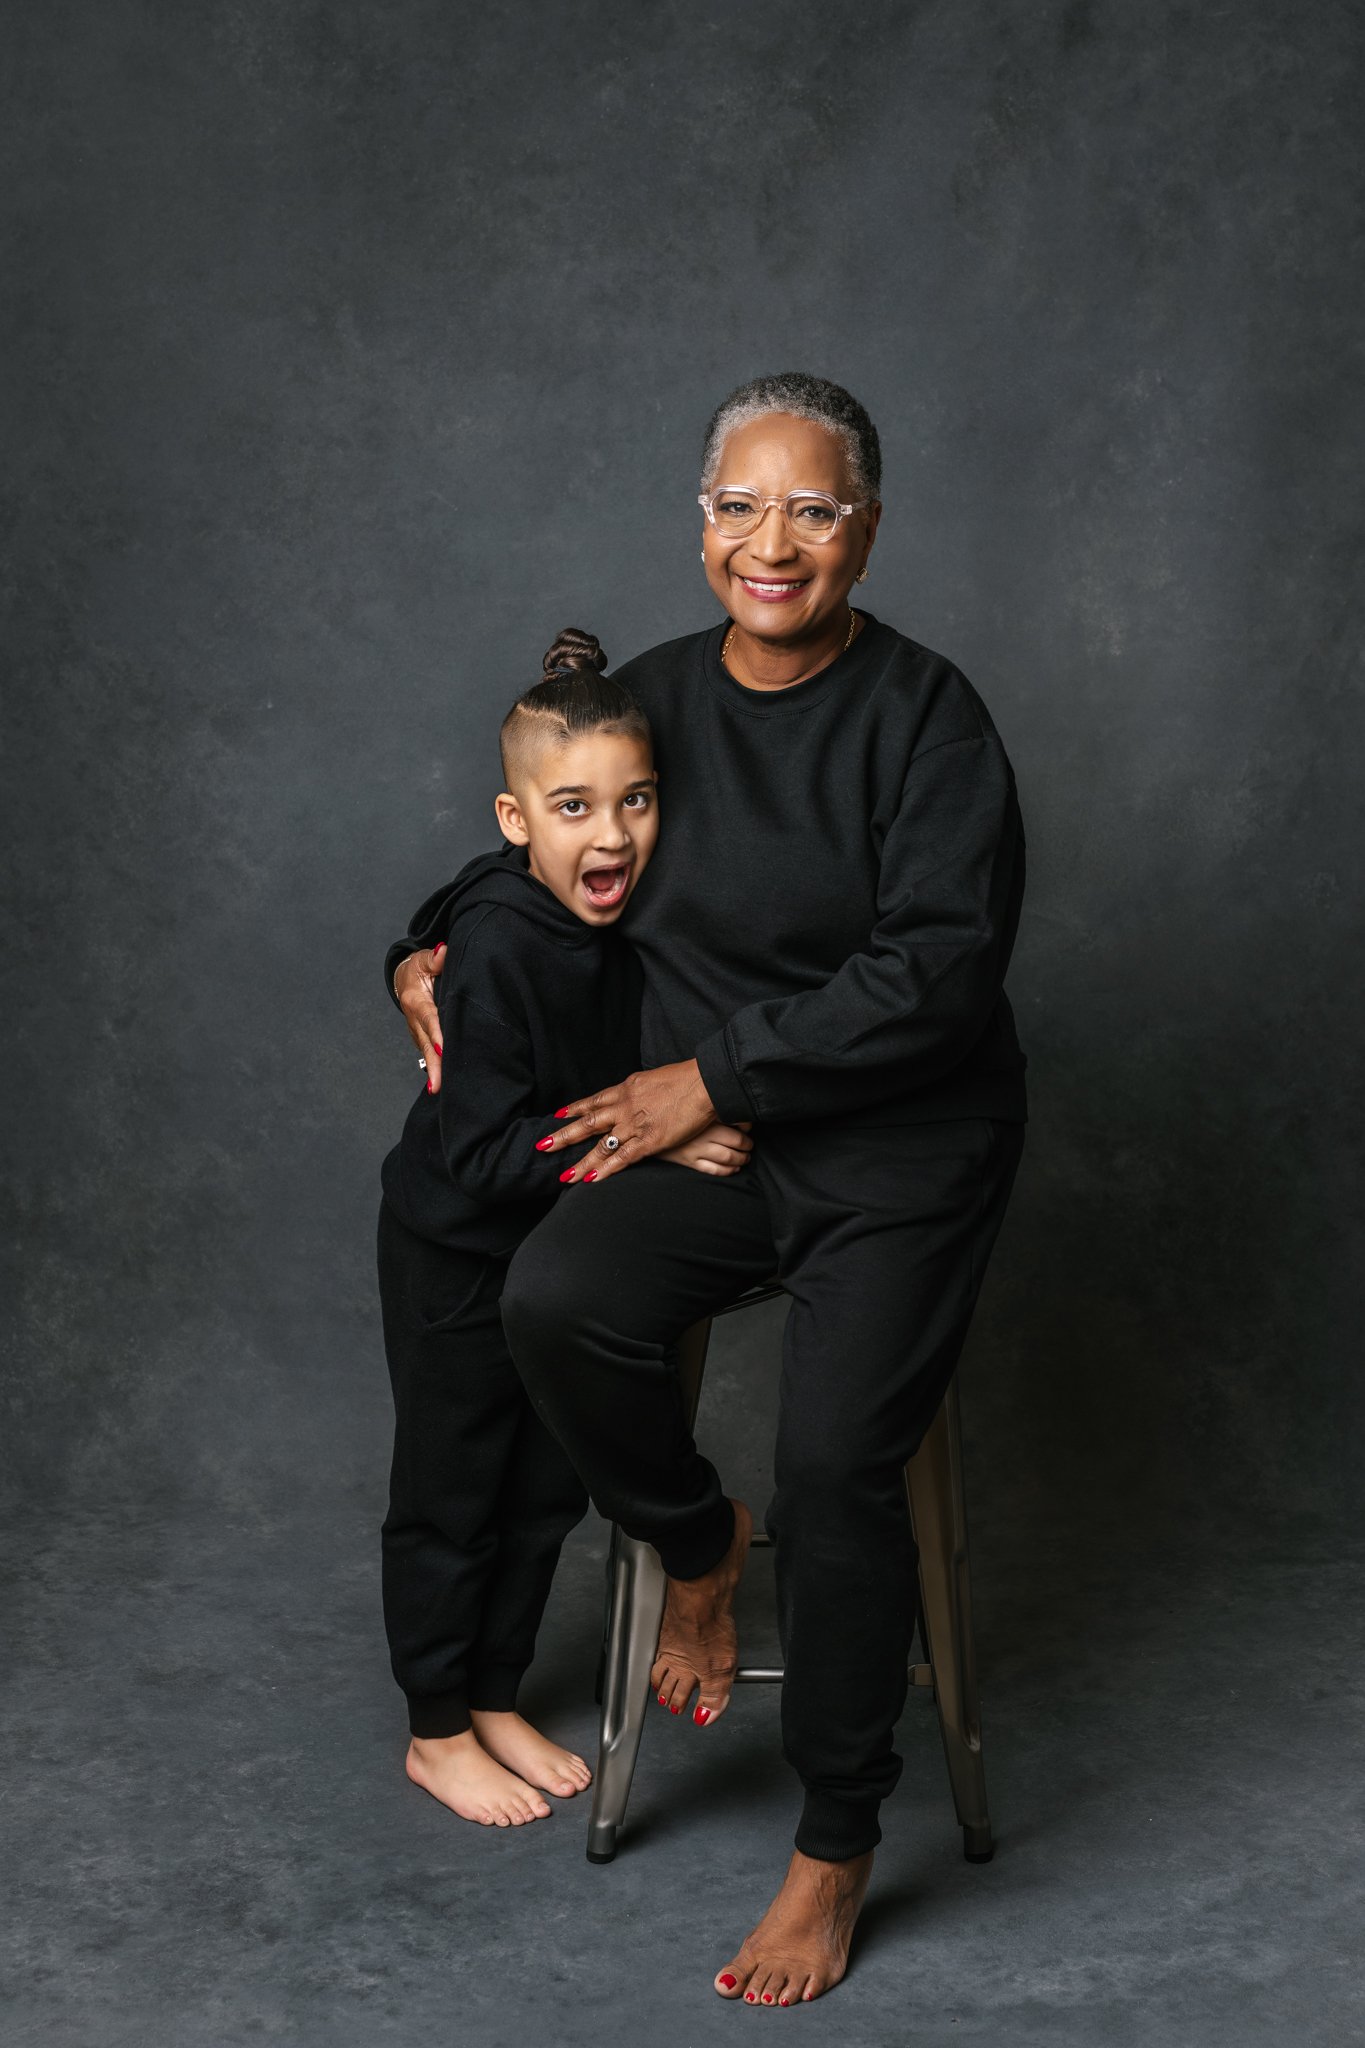  Wearing matching black sweatsuits a grandma and grandson hug by Nicole Hawkins Photography. black outfits #NicoleHawkinsPhotograaphy #NicoleHawkinsFamilies #Modernfamilypictures #studioportraits #matchingfamilyoutfits #NJphotographer 